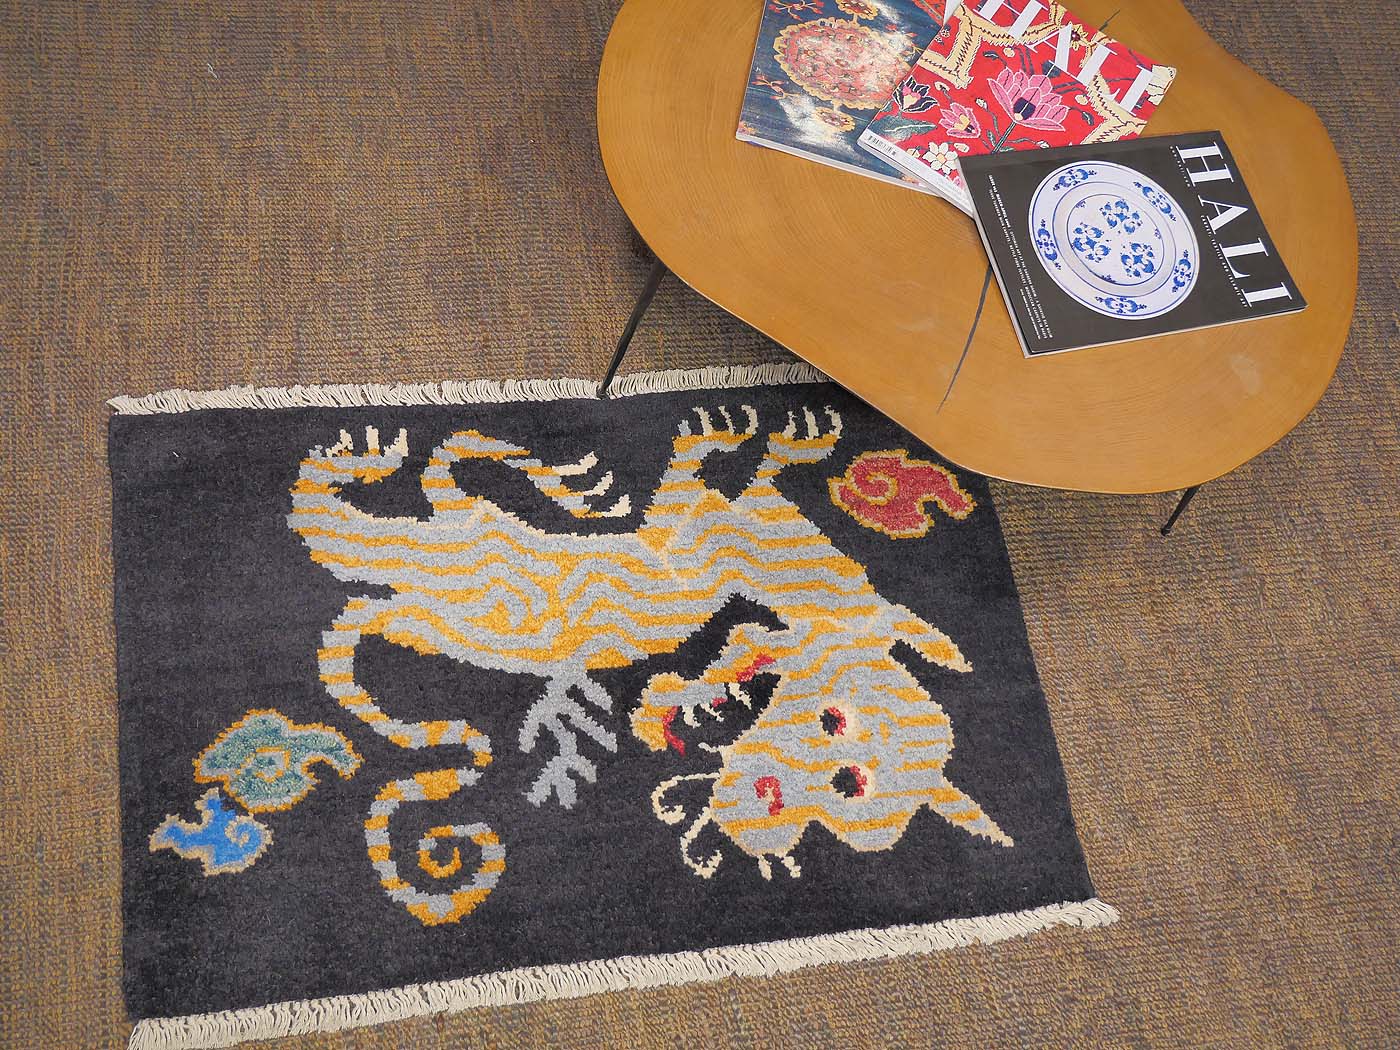 Dragon Cub Rug At Nomad Rugs Of San Francisco With Zoomorphosis Design